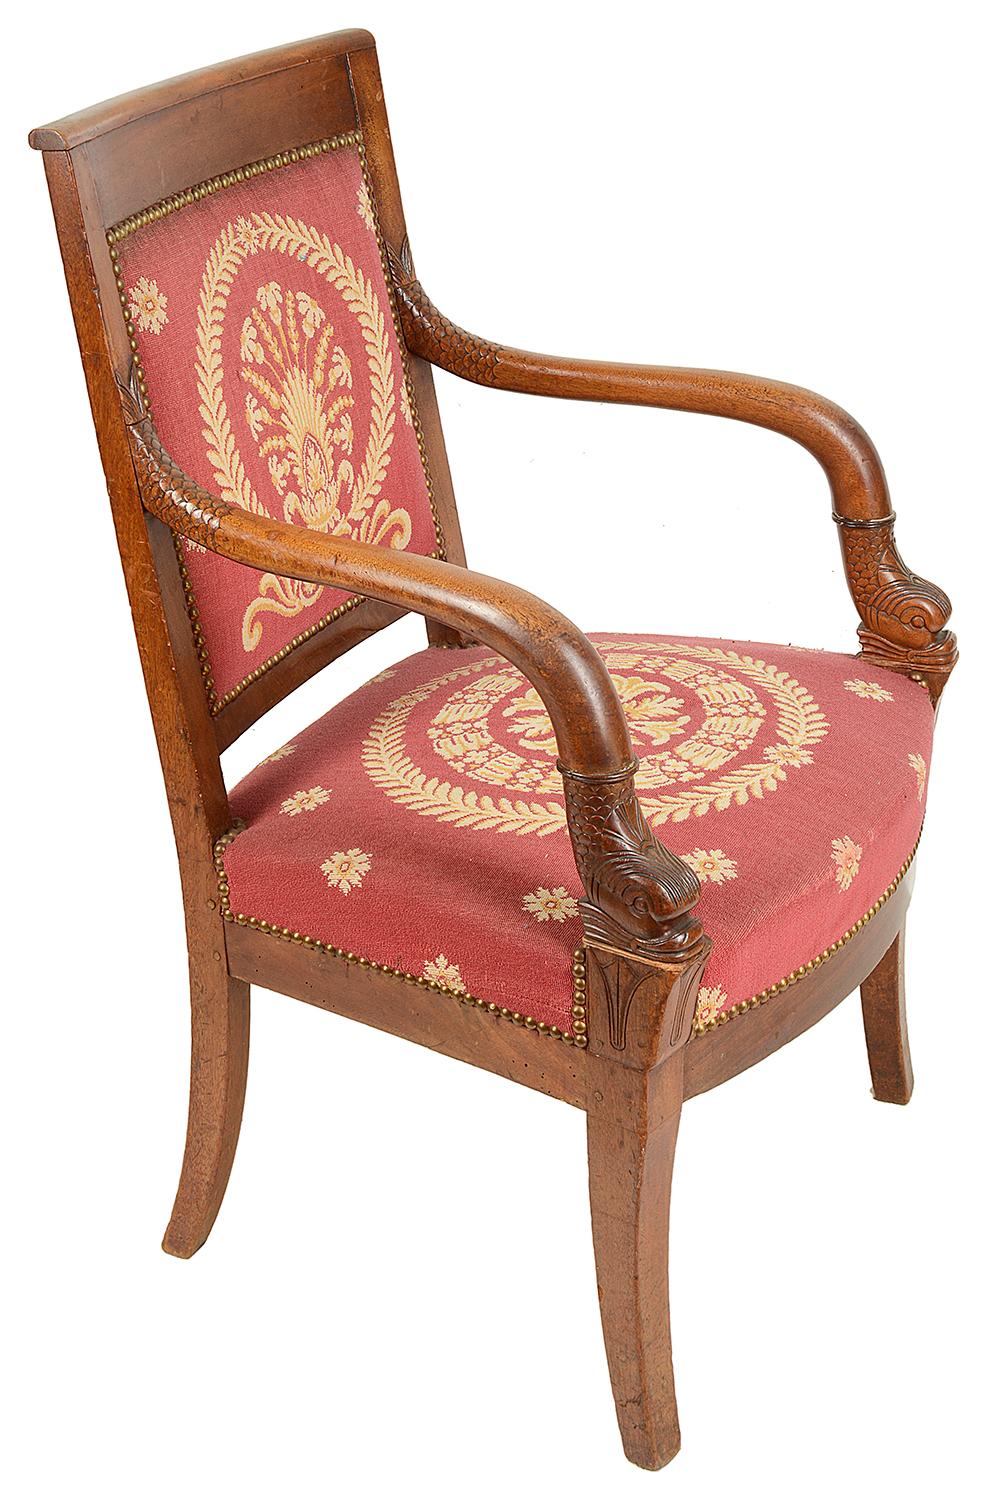 Matched Pair of French Empire Armchairs, 19th Century For Sale 3